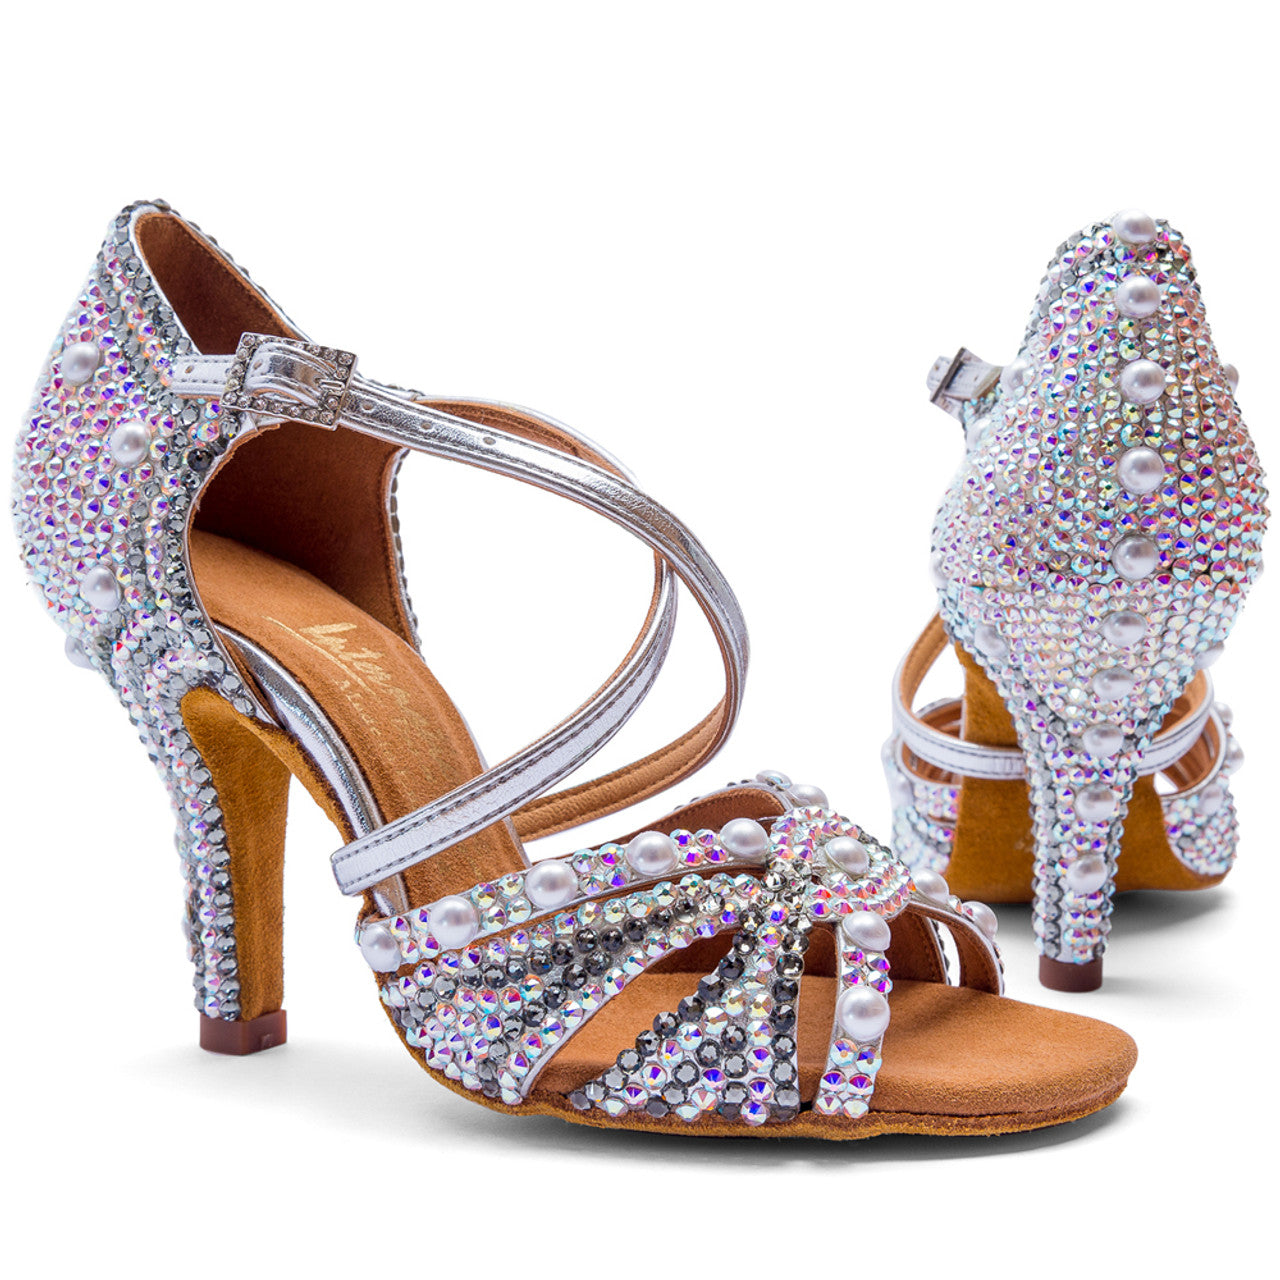 International Dance Shoes IDS Silver Mia Latin Dance Shoe by Lauren Covered in Preciosa Crystals and Pearls